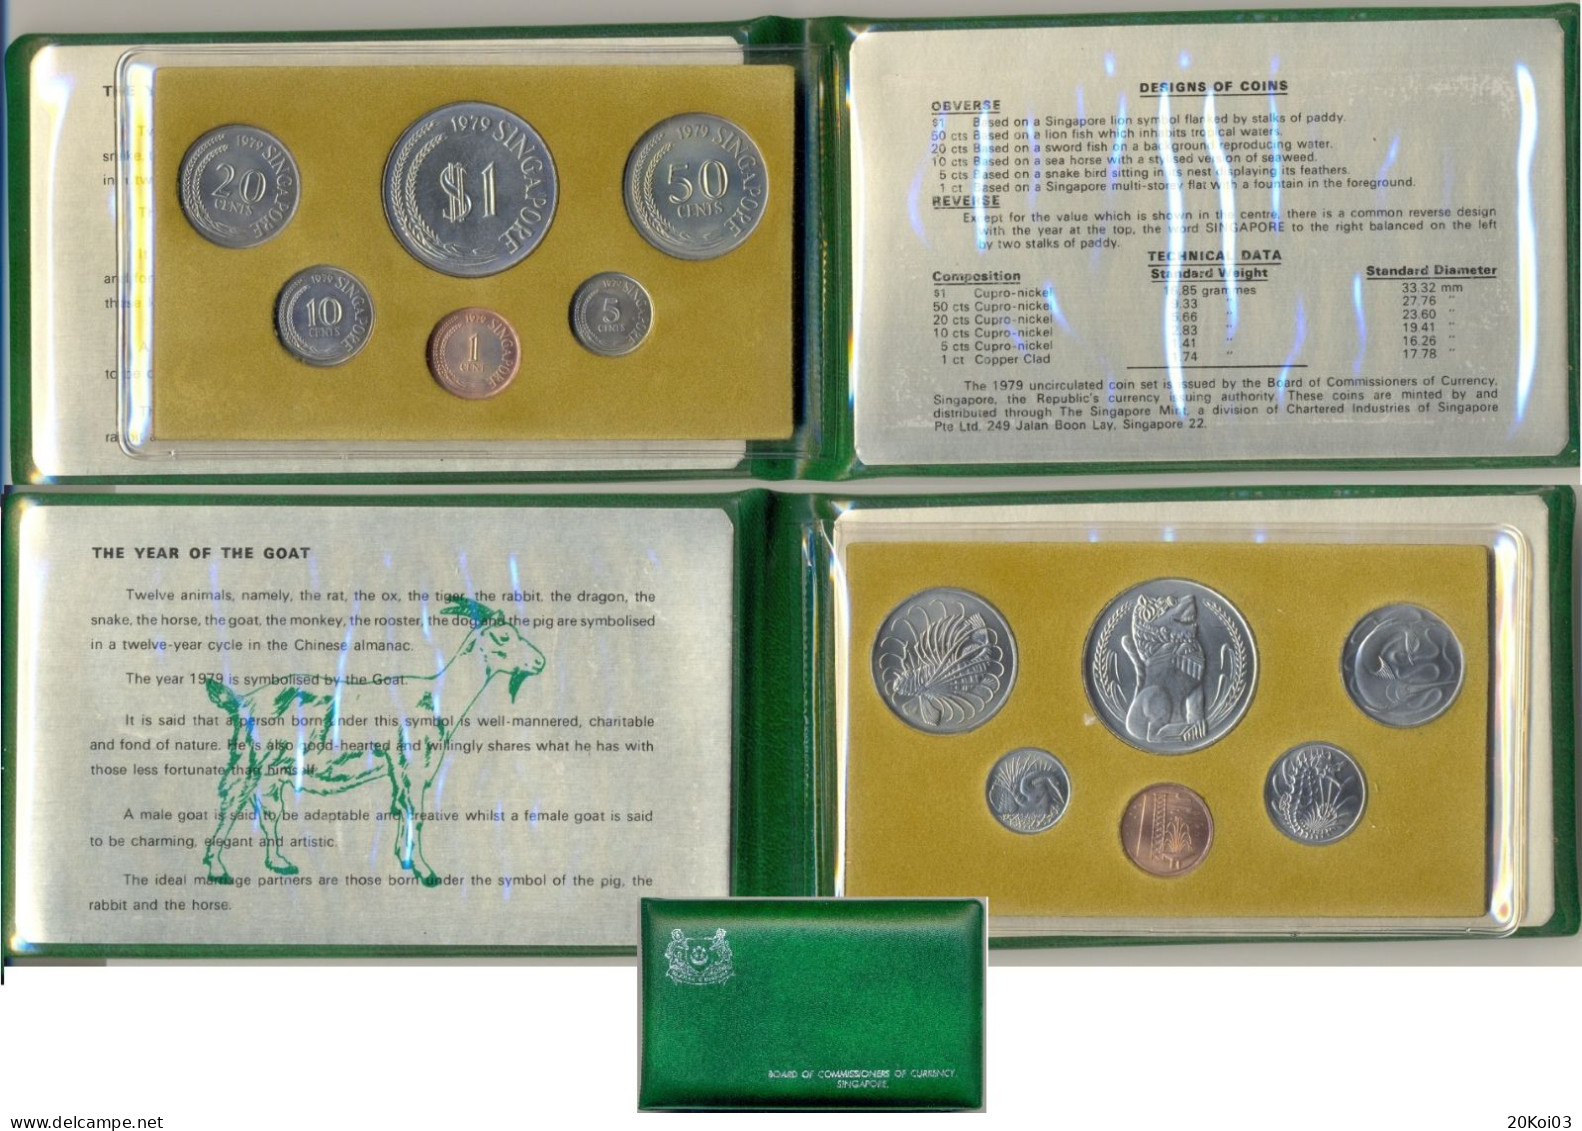 Singapore Coin Set Coins 1979 Uncirculated, The Year Of The Goat, Board Of Commissioners Of Currency_SUP - Singapour